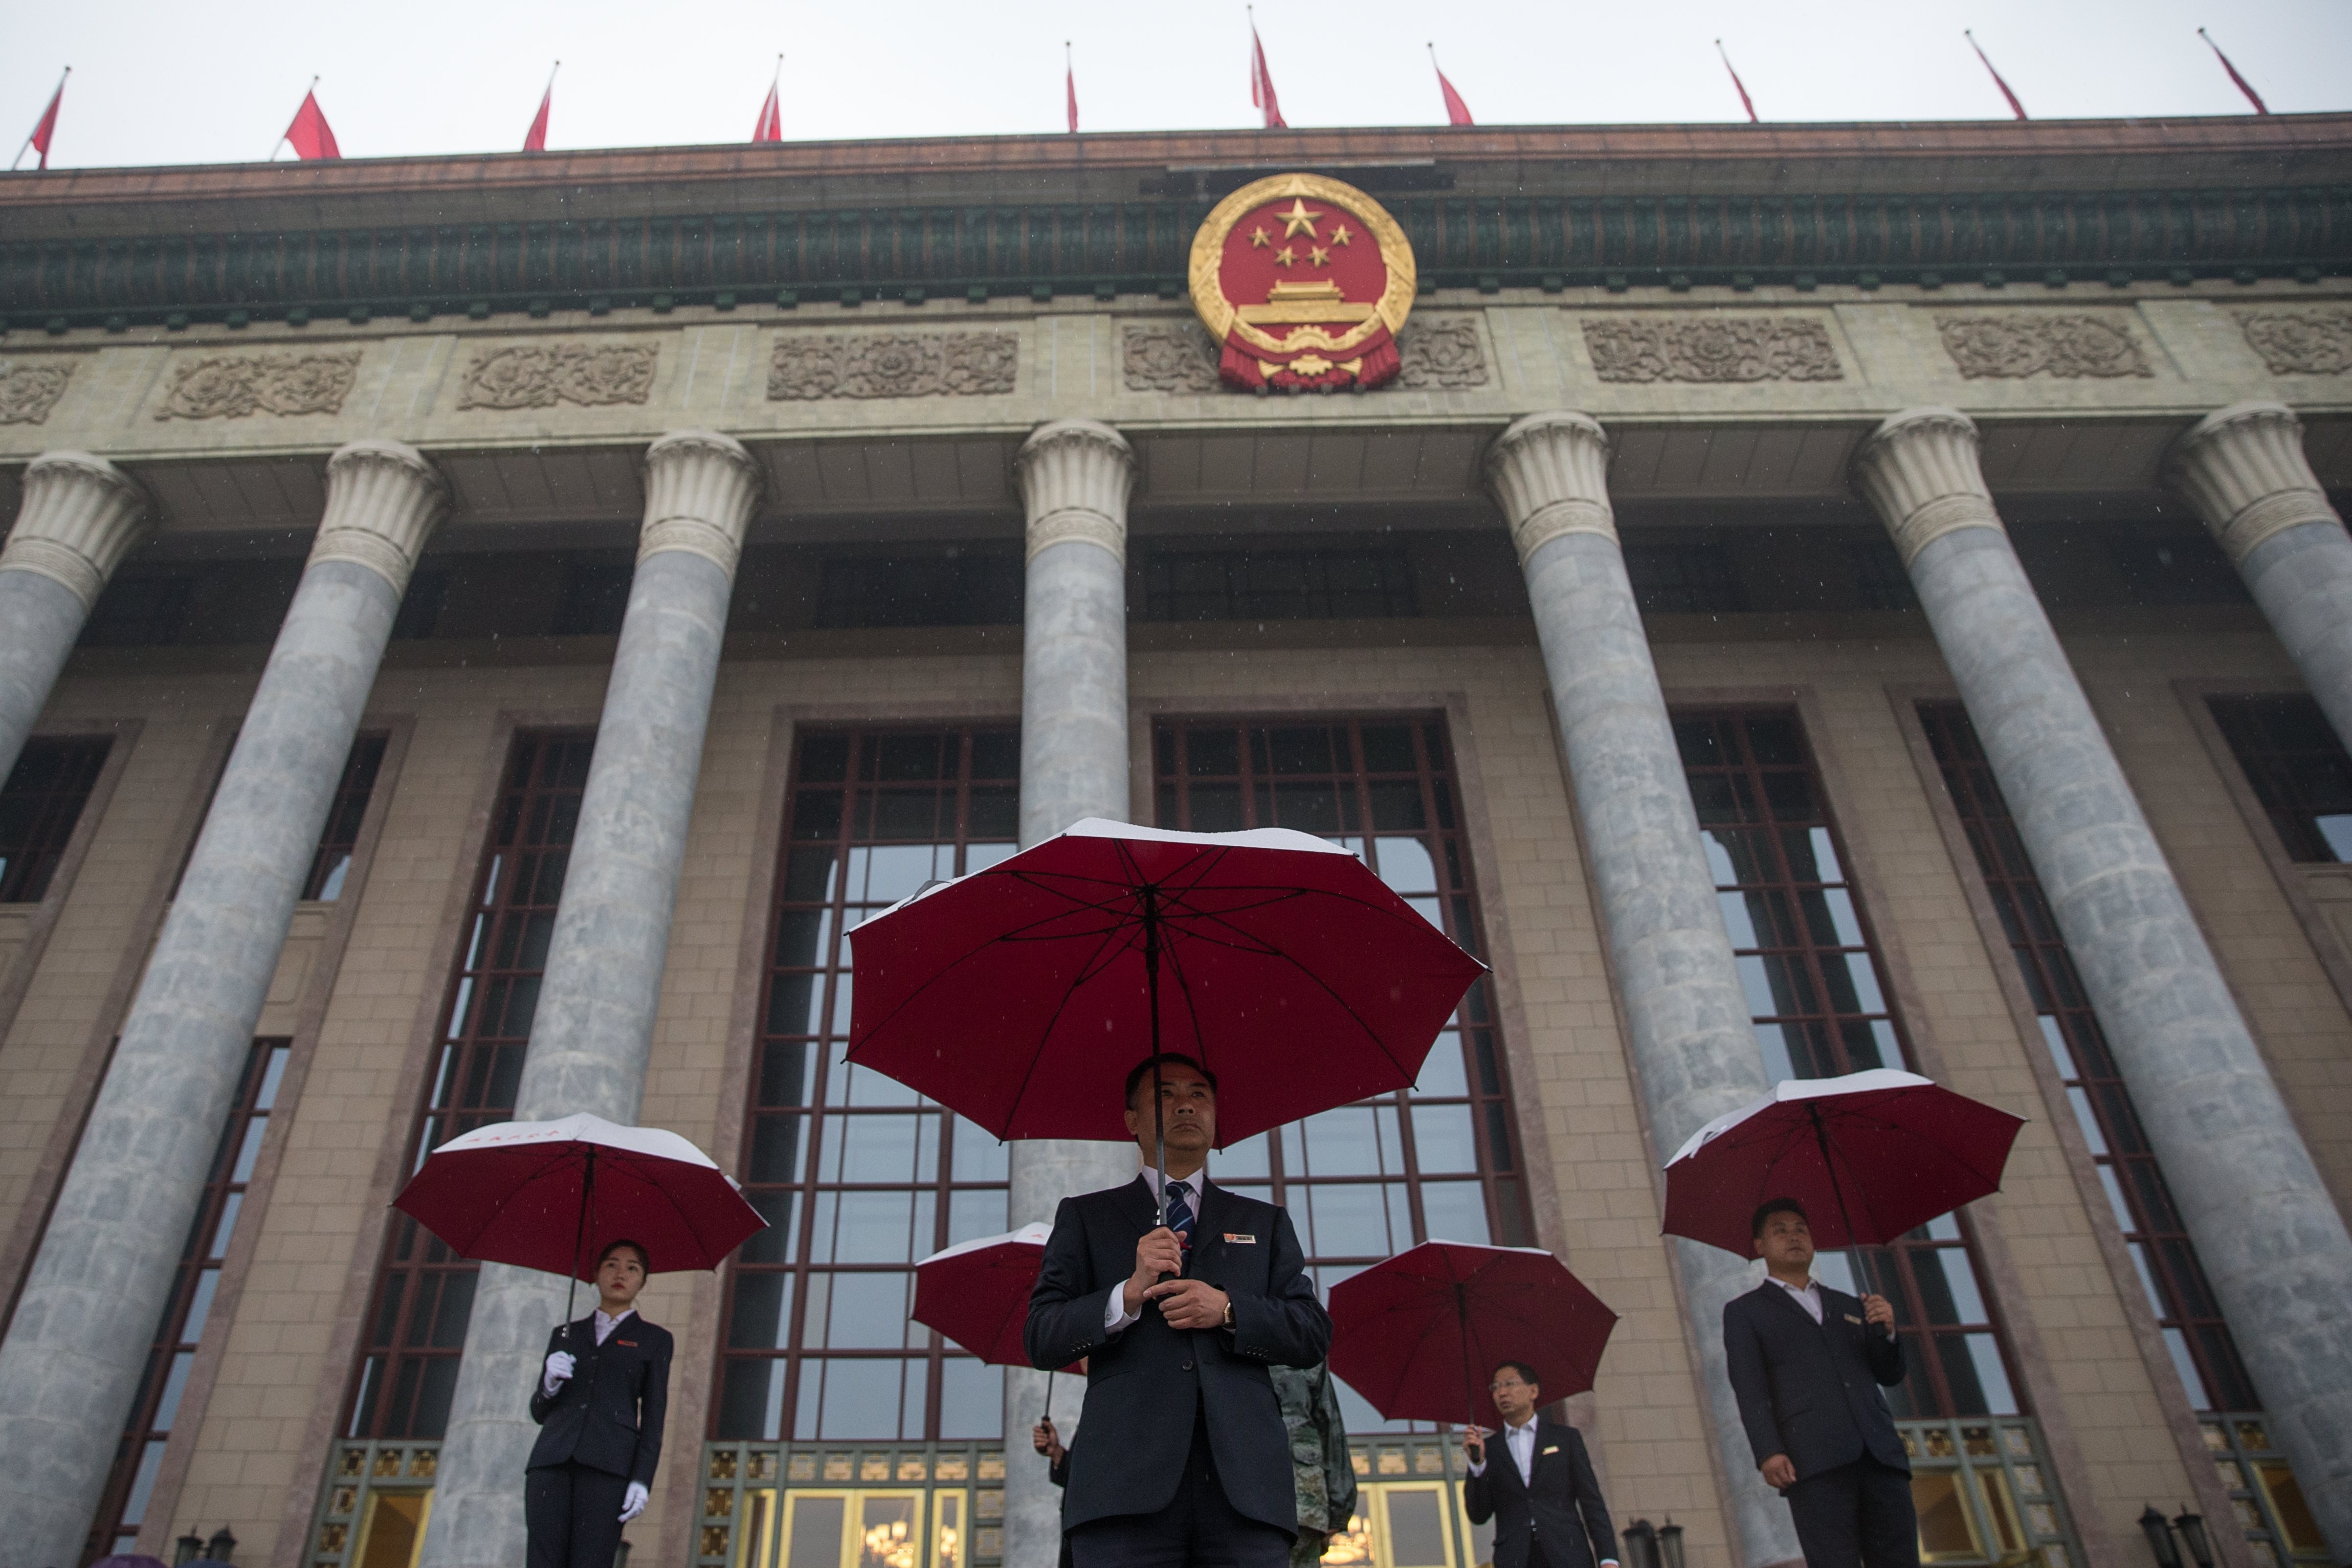 China is prepared for the global turbulence with its decades-long use of five-year plans, the latest of which was made in 2017, at the Great Hall of the People in Beijing, seen here on October 18, with security officers standing guard before the opening ceremony of the 19th National Congress of the Communist Party of China. Photo: EPA-EFE